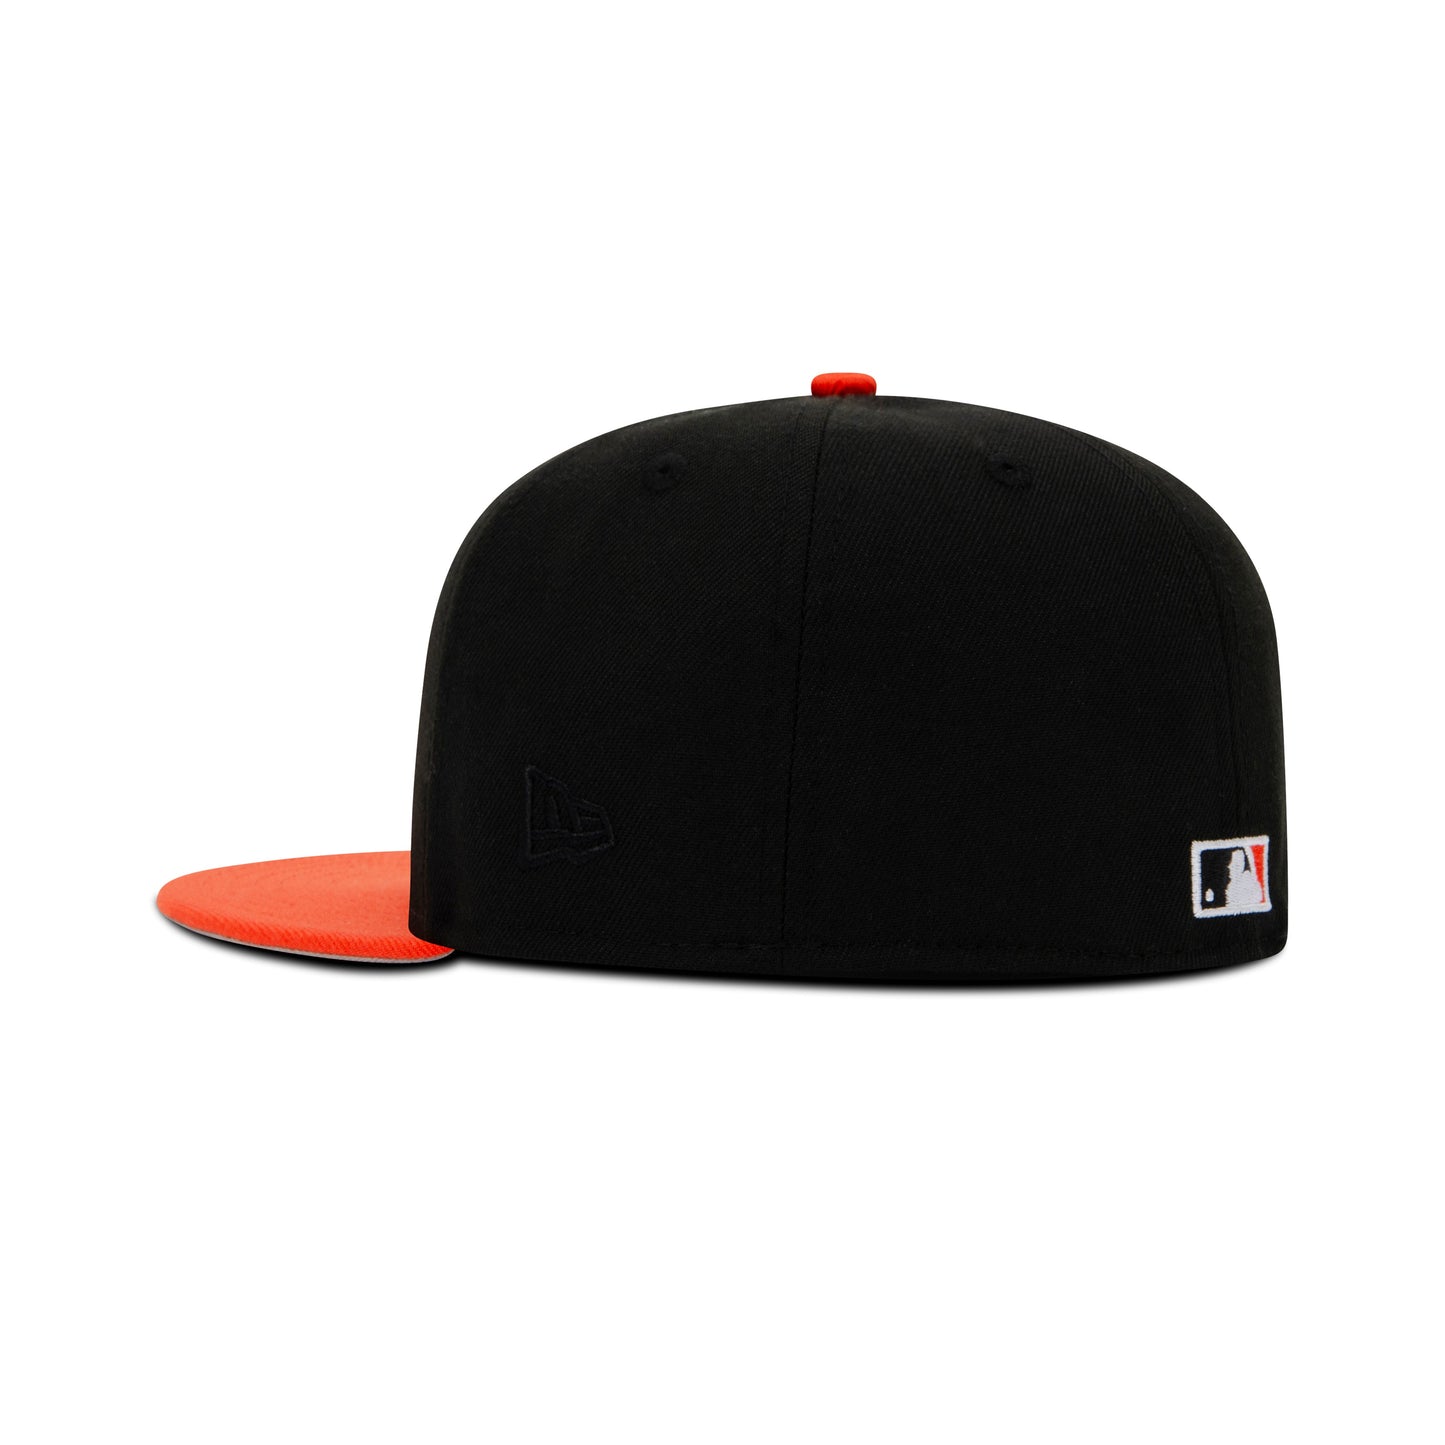 New Era San Francisco Giants Fitted Grey Bottom "Black Orange" (2007 All Star Game Embroidery)